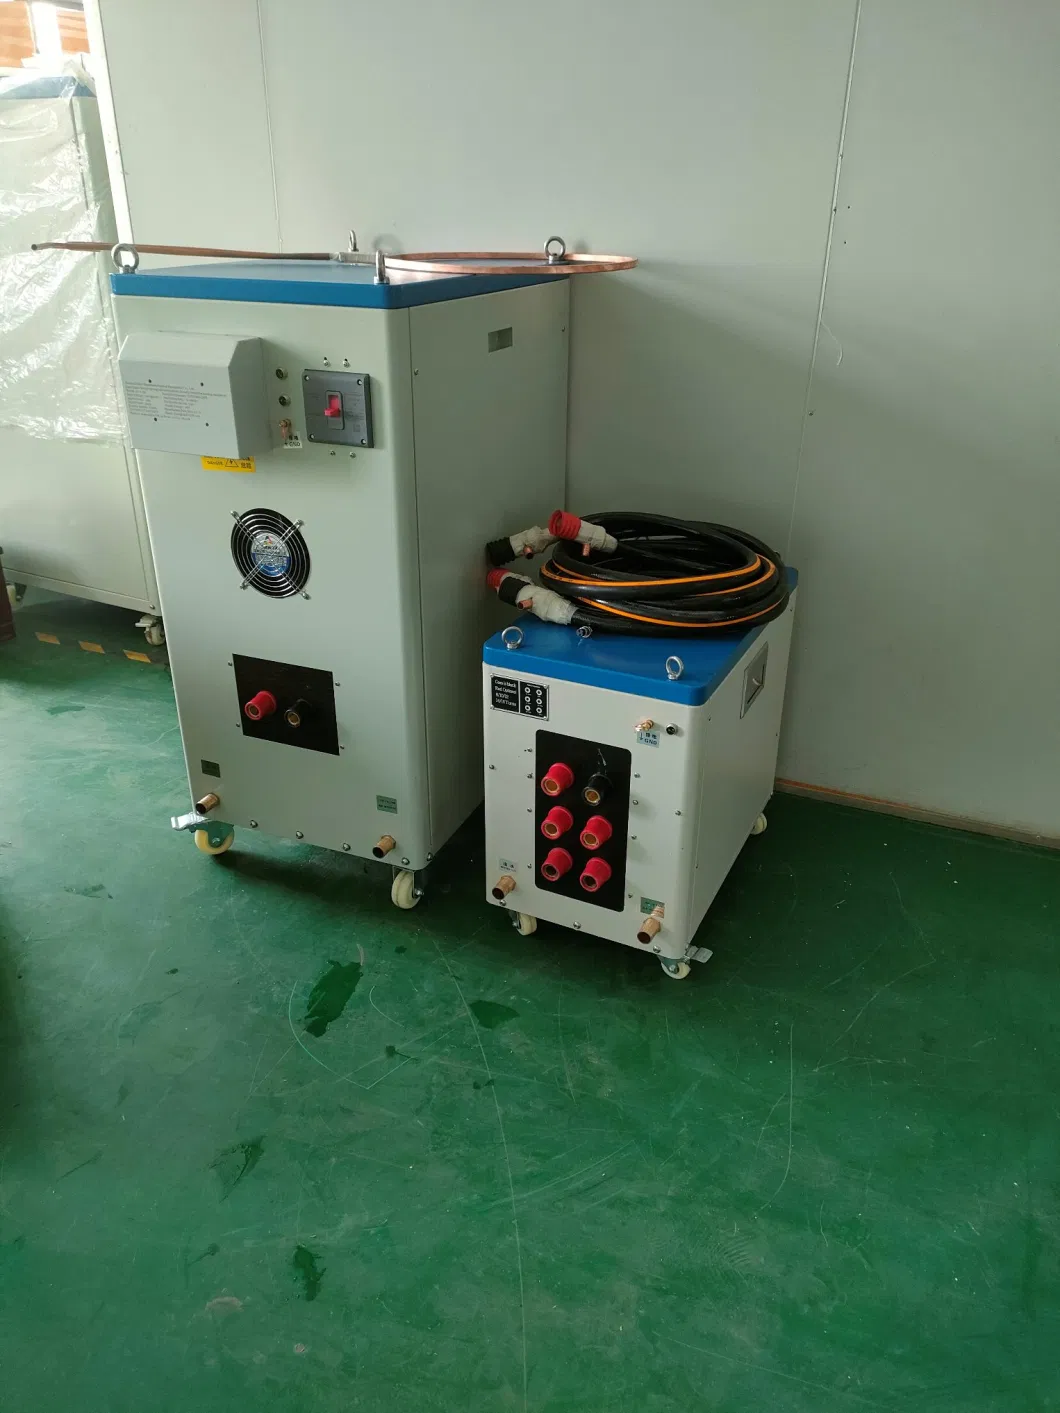 China Manufacturer Direct Sales IGBT Super Audio Induction Heating Machine for Annealing to Iron Bar / Pipe (SF-120KW)